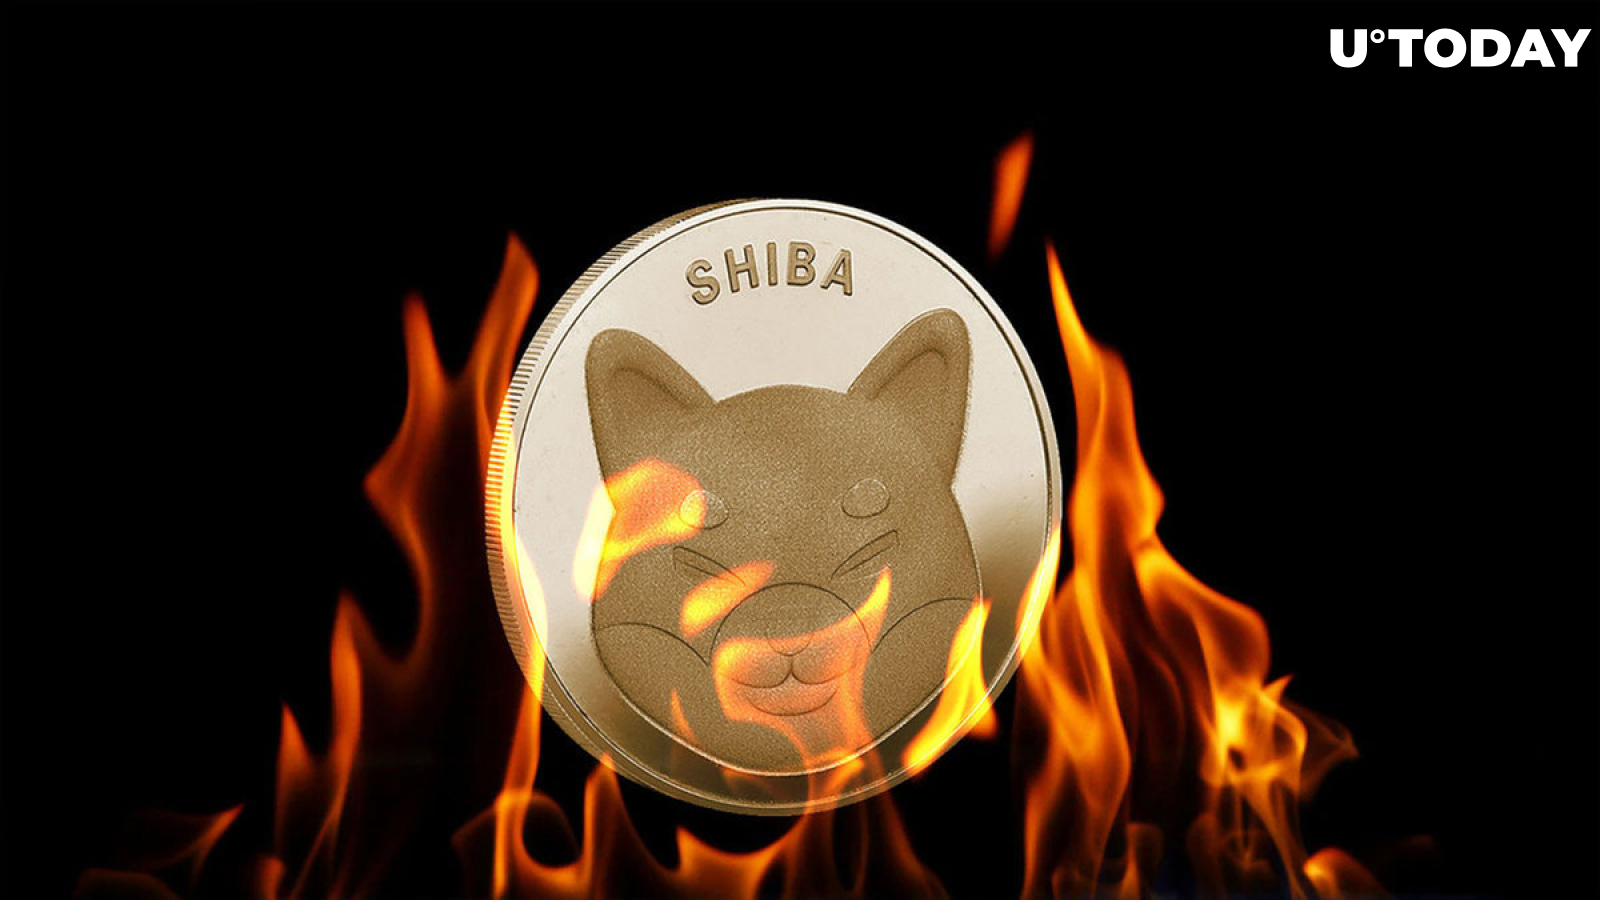 SHIB Price Begins to Recover, While Shiba Inu Burn Rate Plummets